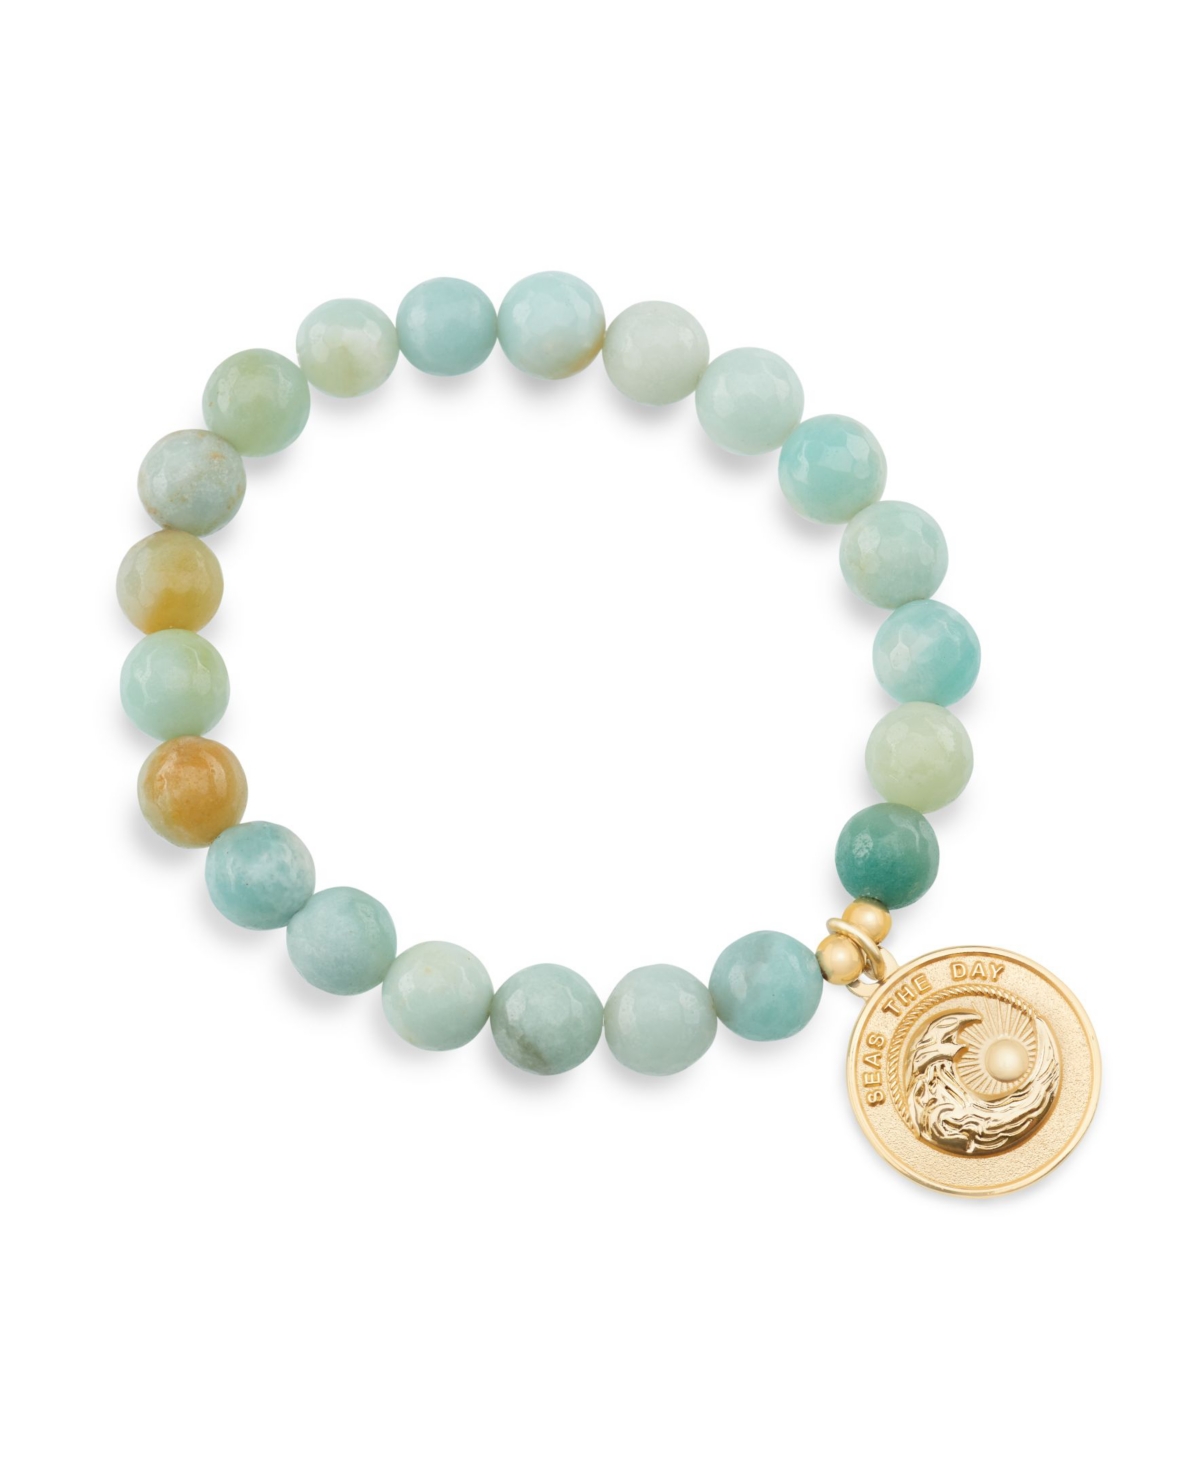 Katie's Cottage Barn Faceted Amazonite Seas The Day Gemstone Bracelet with Wave Pendant